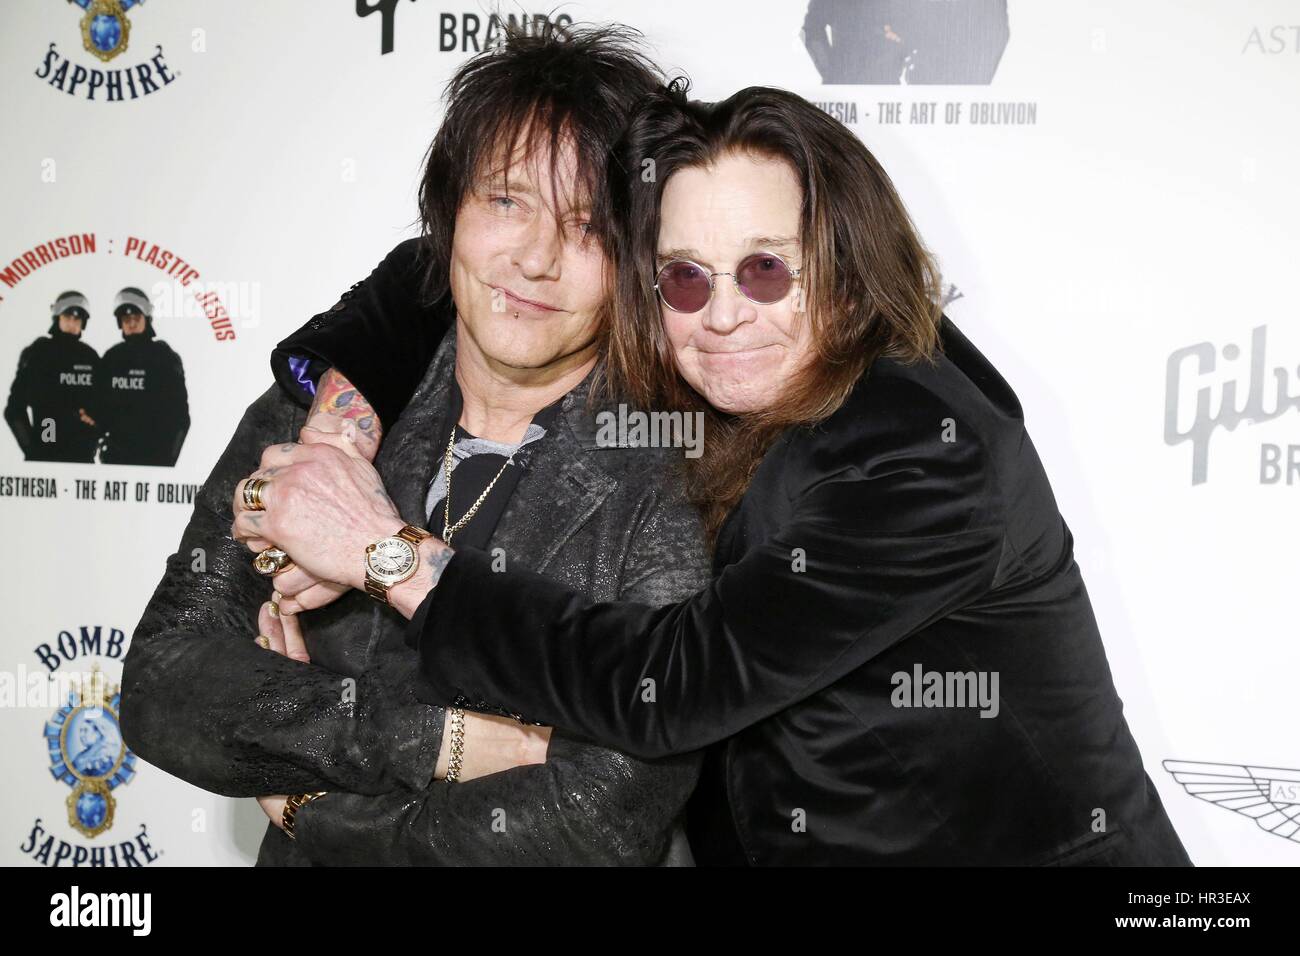 West Hollywood, California. 24th Feb, 2017. Billy Morrison and Ozzy  Osbourne attend the 'Anesthesia: The Art of Oblivion' by Billy Morrison &  Plastic Jesus opening reception at Gibson Brands Sunset on February